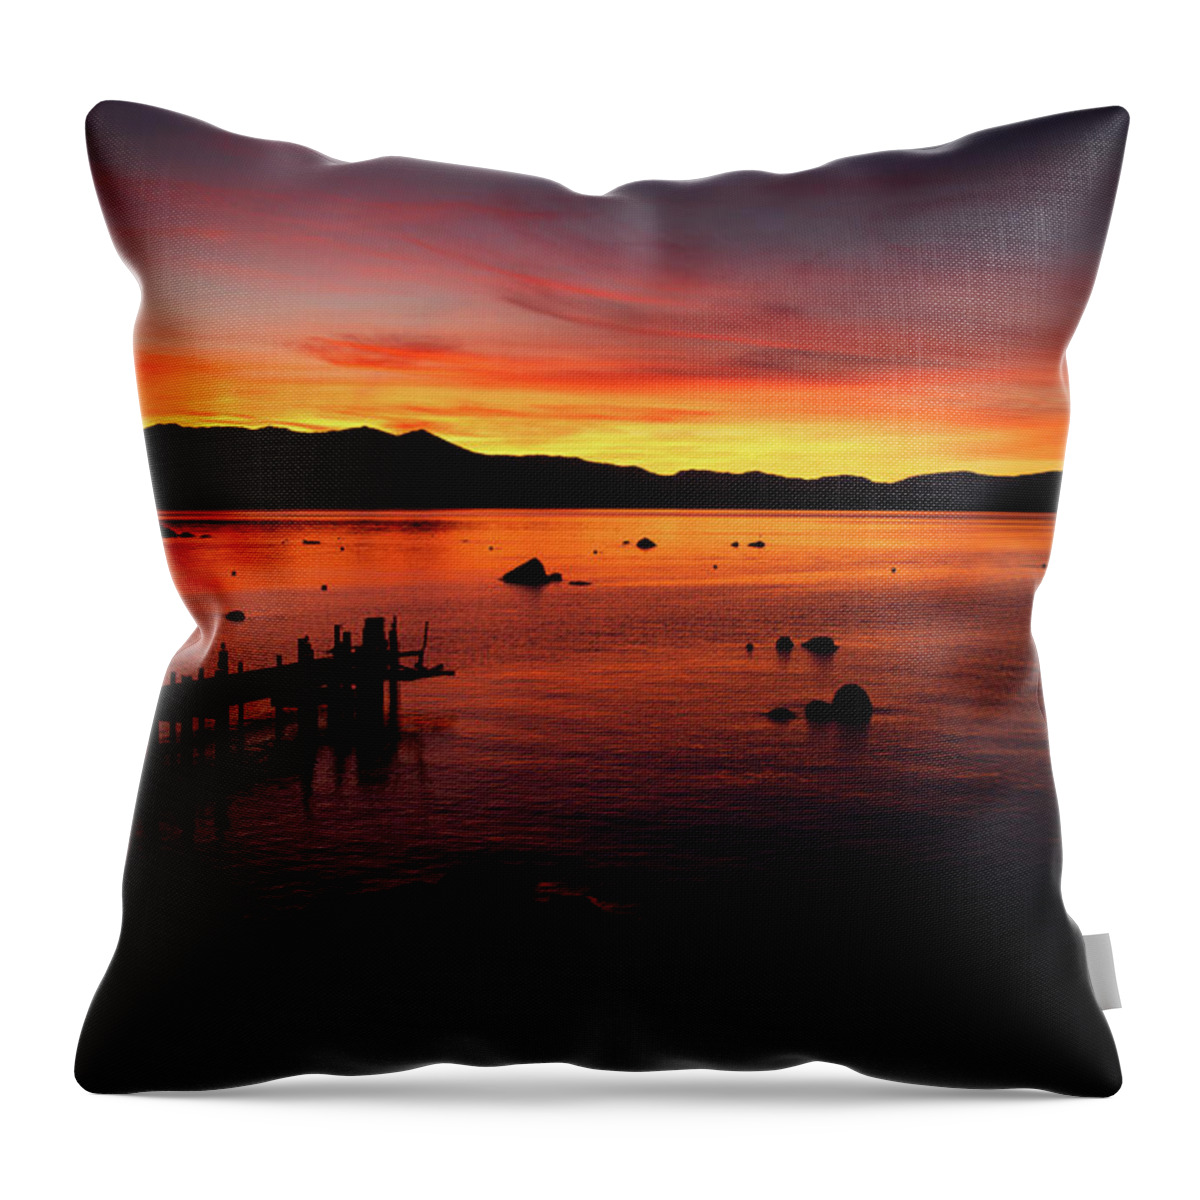 Landscape Throw Pillow featuring the photograph Zephyr Cove Sunset by Aileen Savage